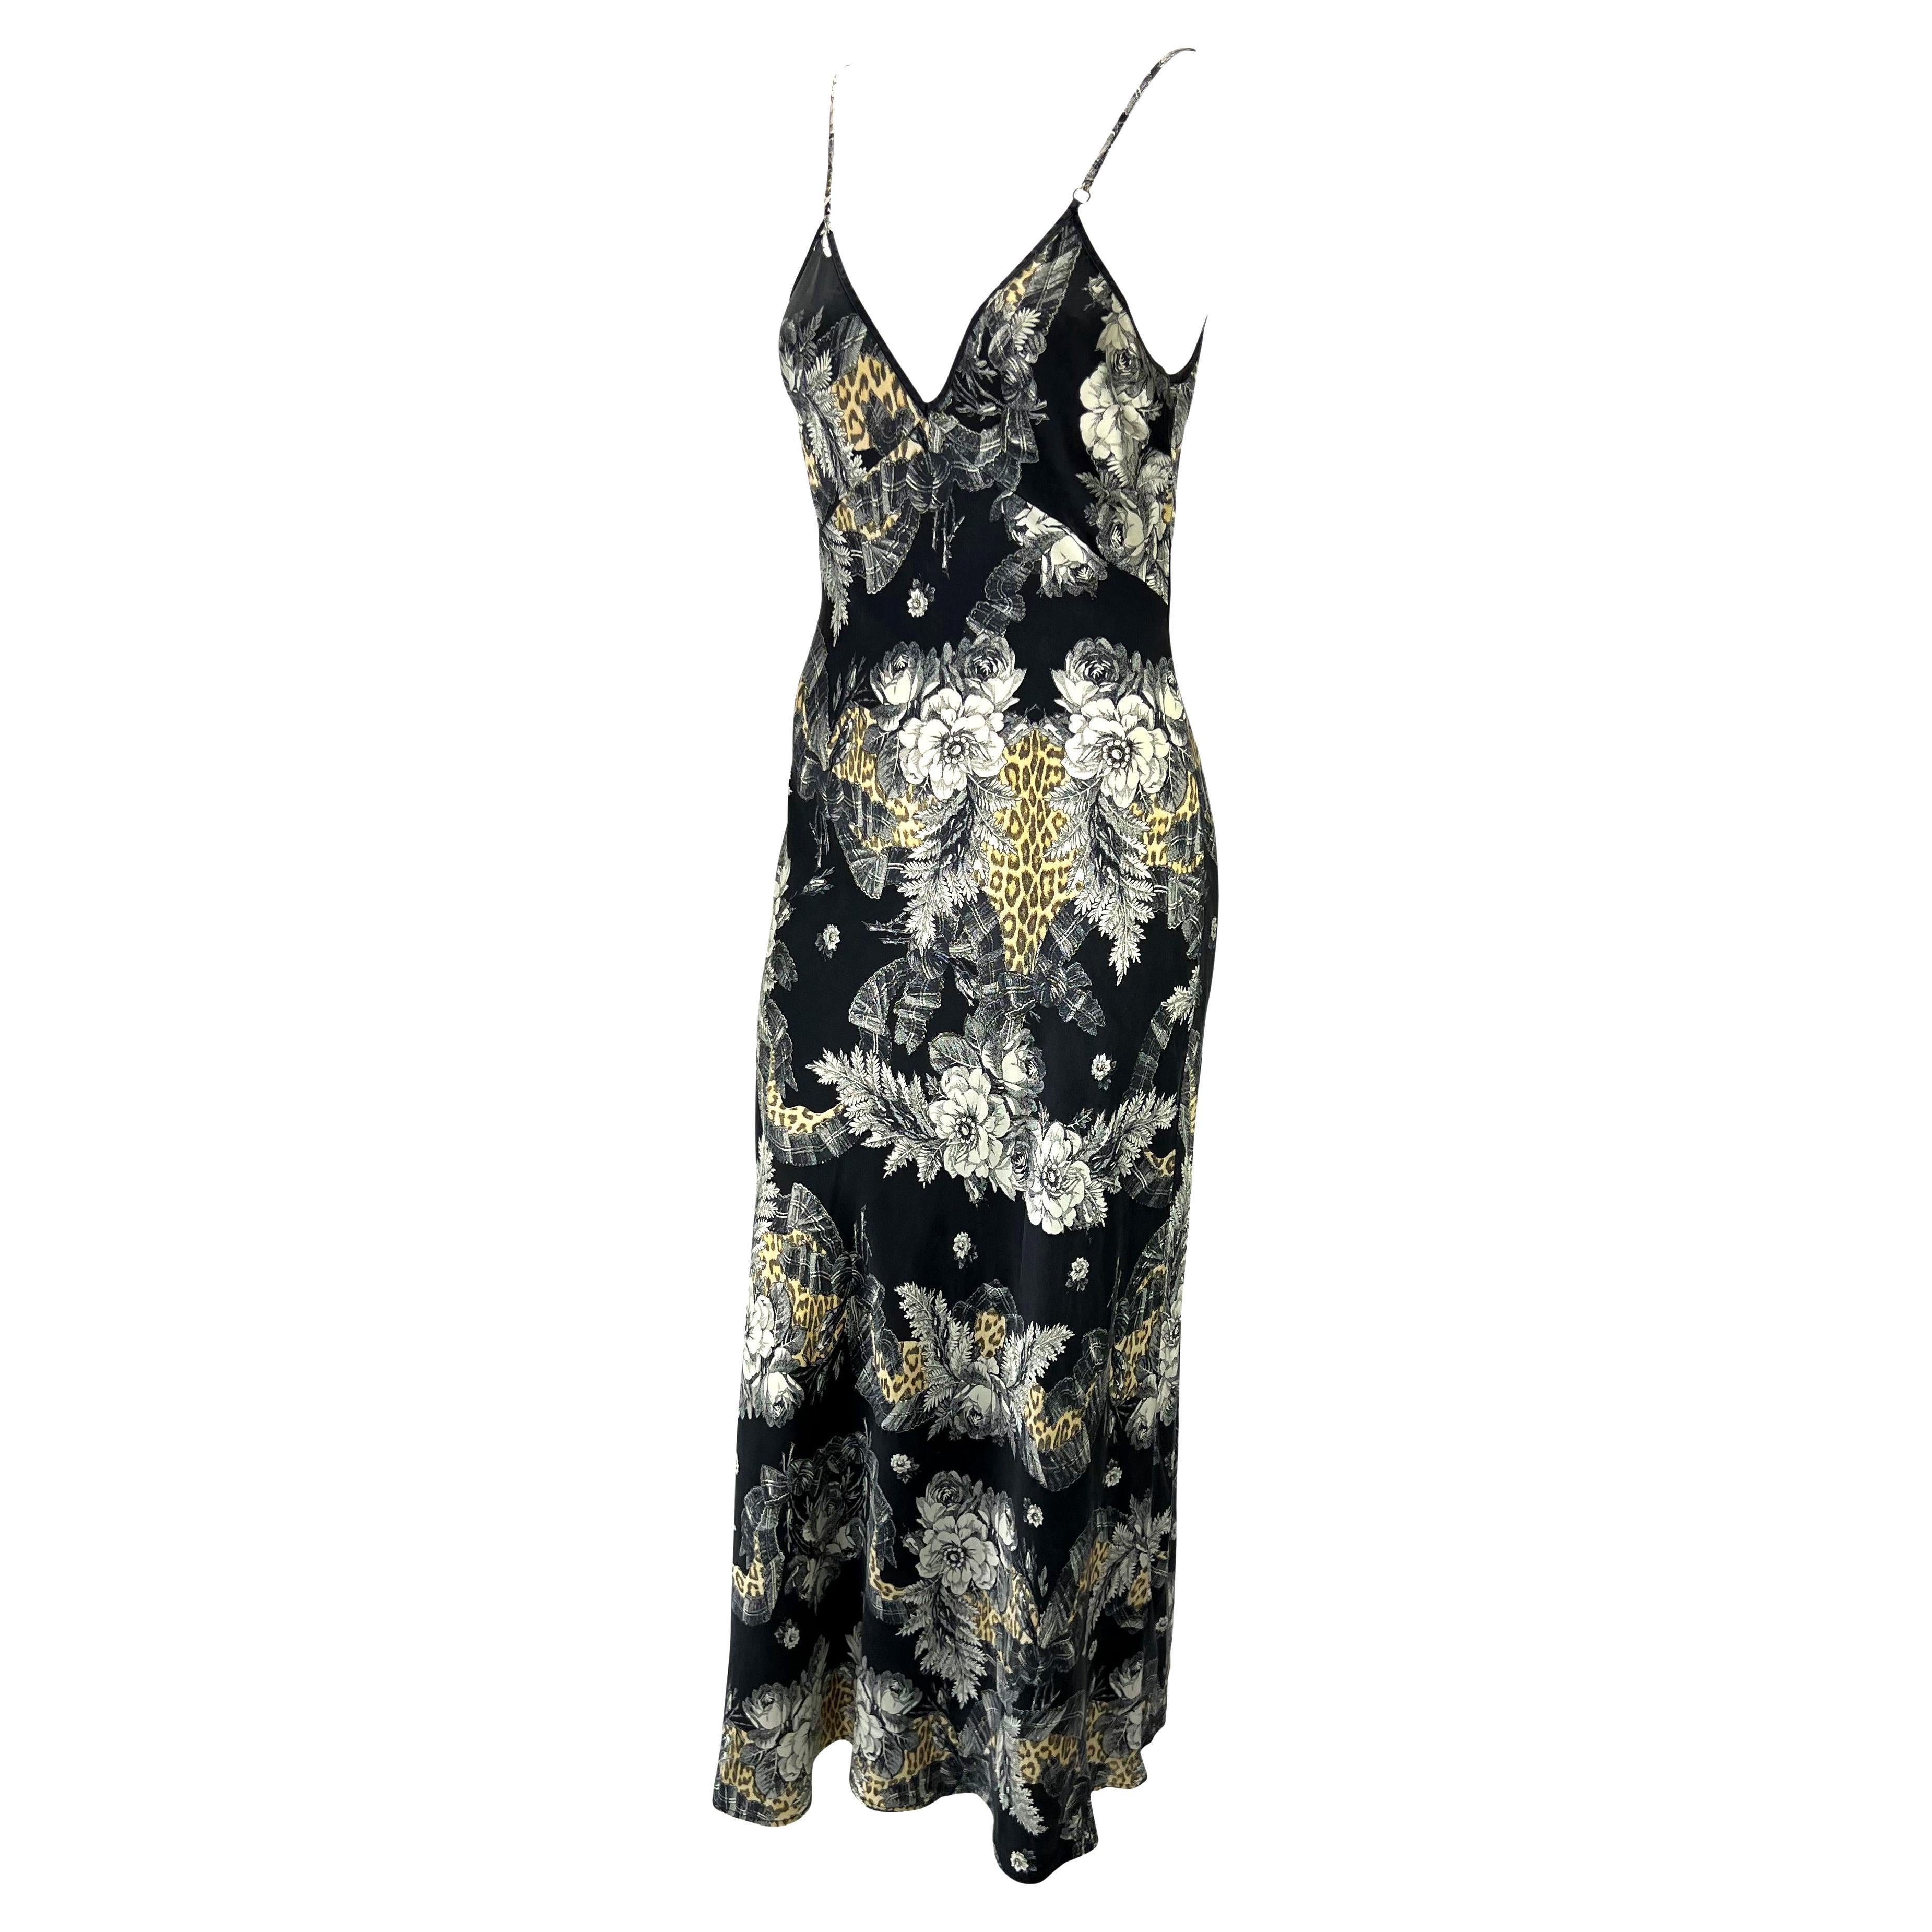 Presenting a slinky printed silk slip dress designed by Roberto Cavalli for his intimates collection in the early 2000s. The faded silk satin features cheetah print and floral designs throughout. This piece is easy to dress up as a slip dress or